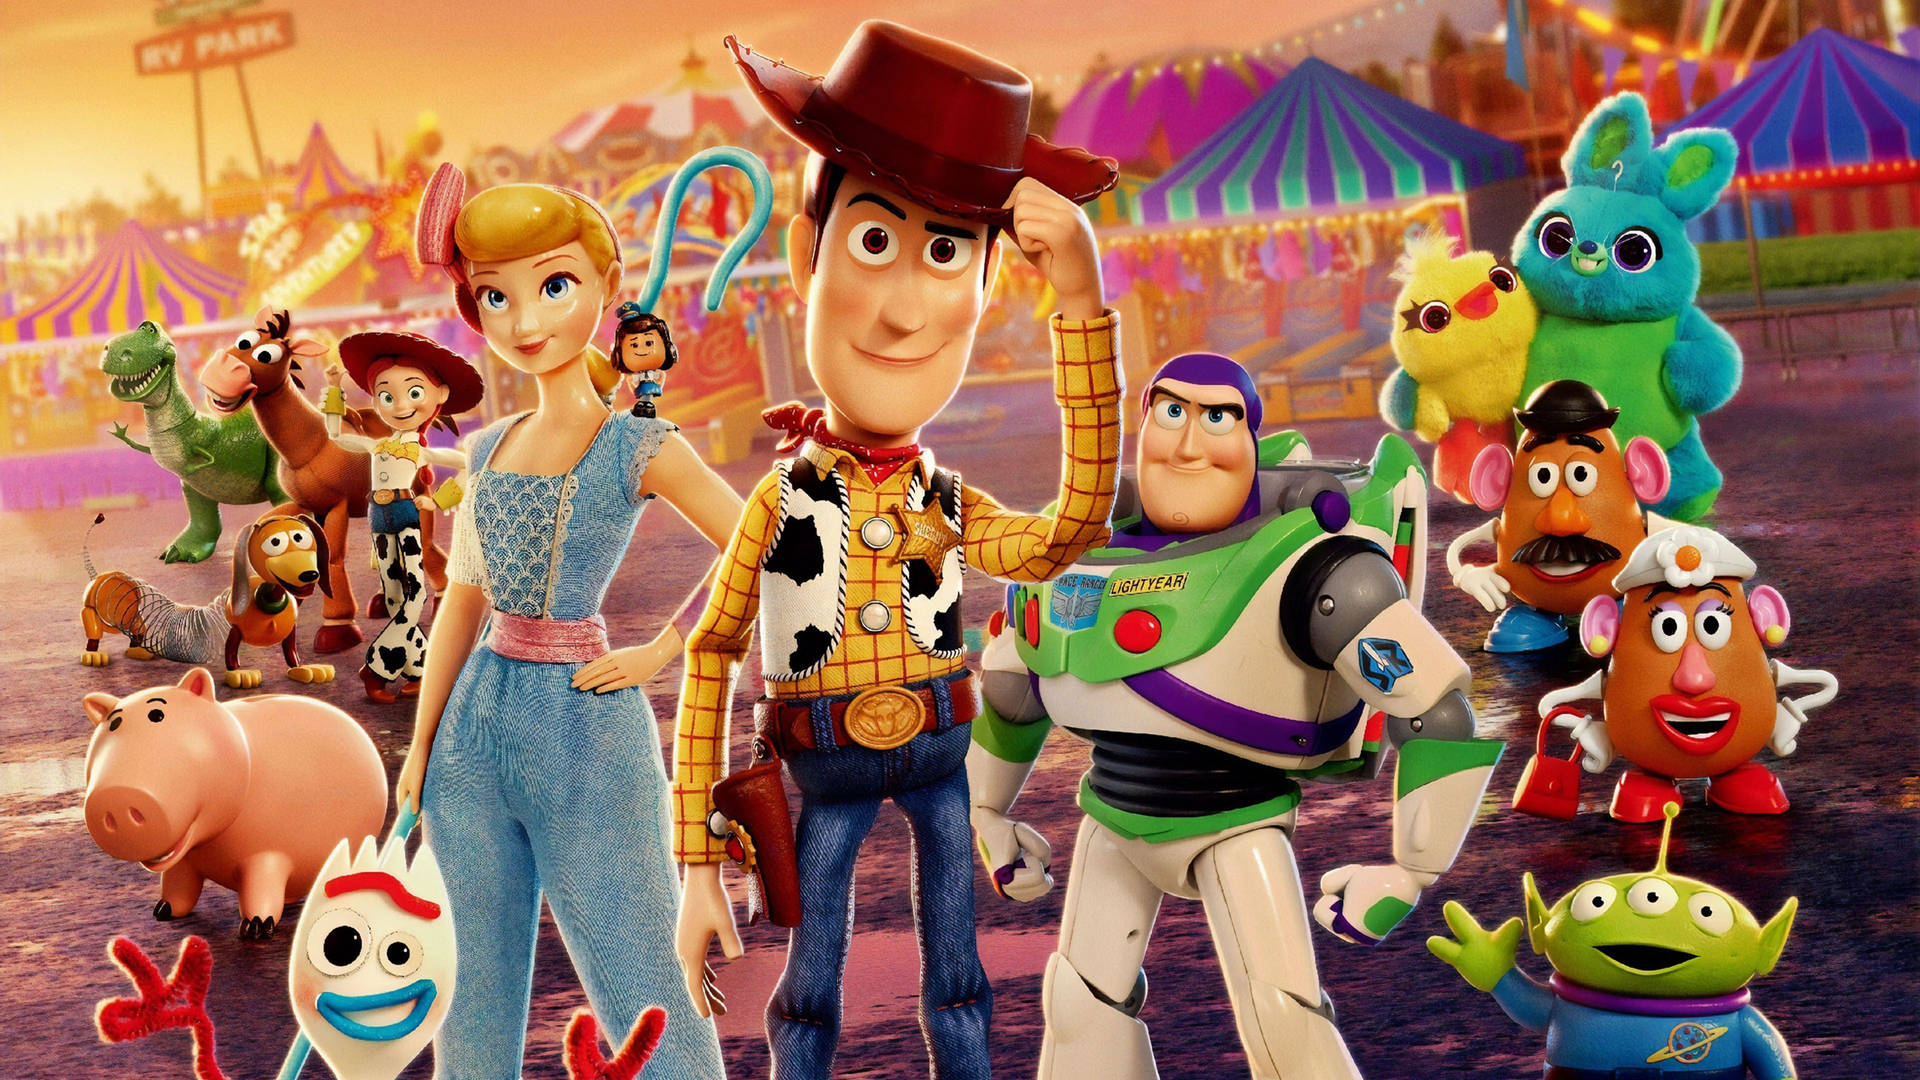 Woody and Buzz Lightyear embark on a new adventure in Toy Story 4 Wallpaper